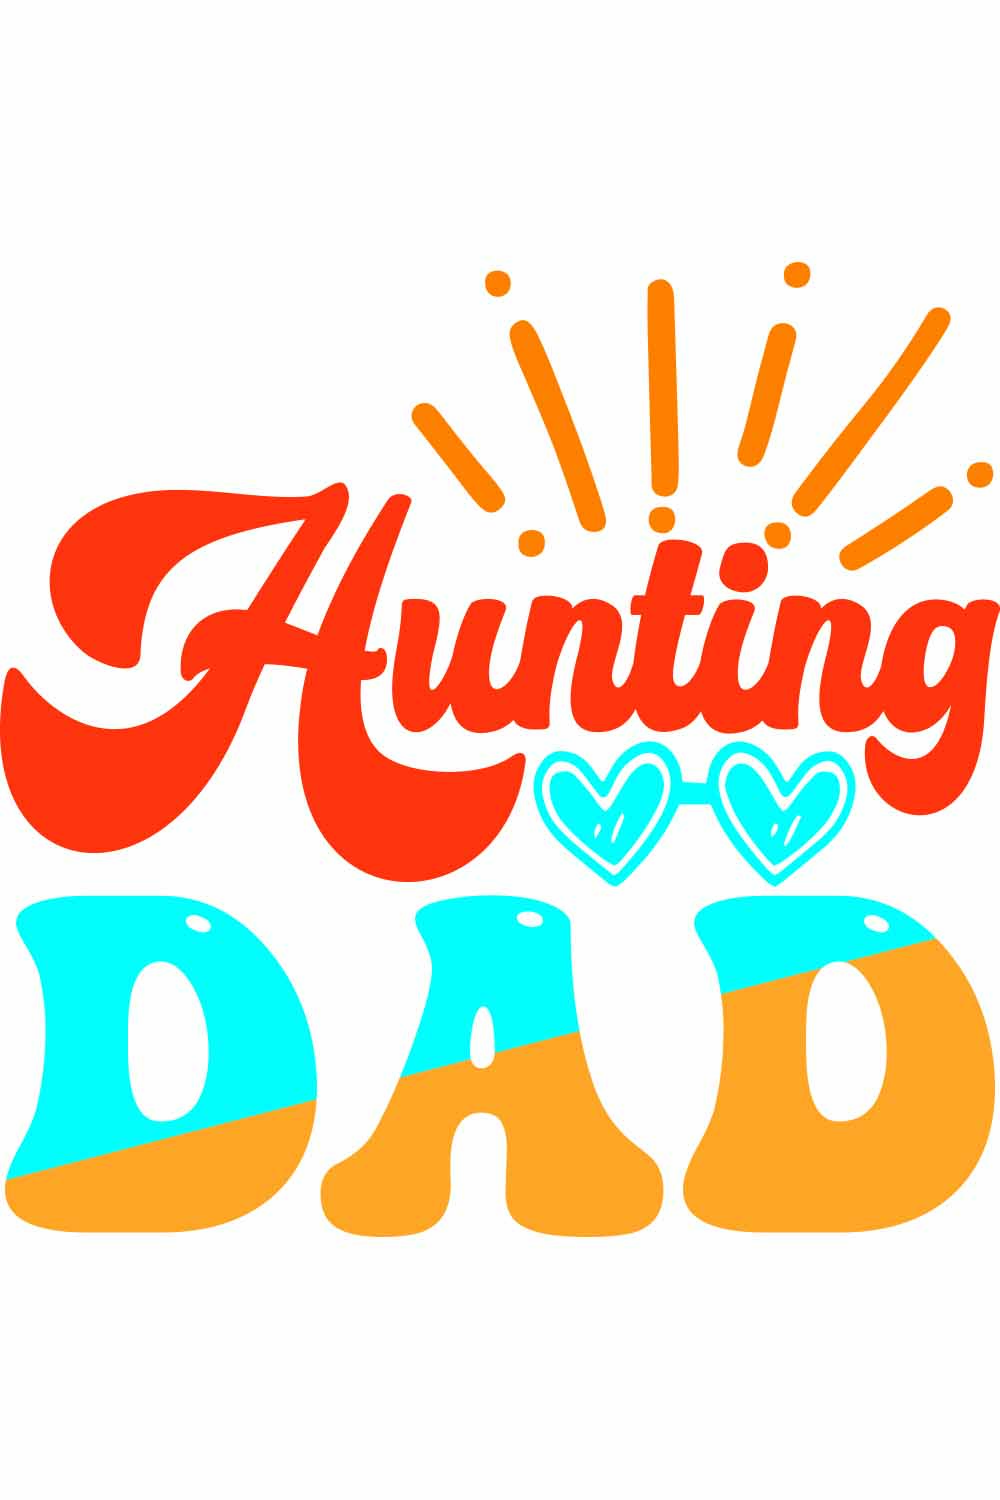 Hunting dad Retro t-shirt Designs pinterest preview image.